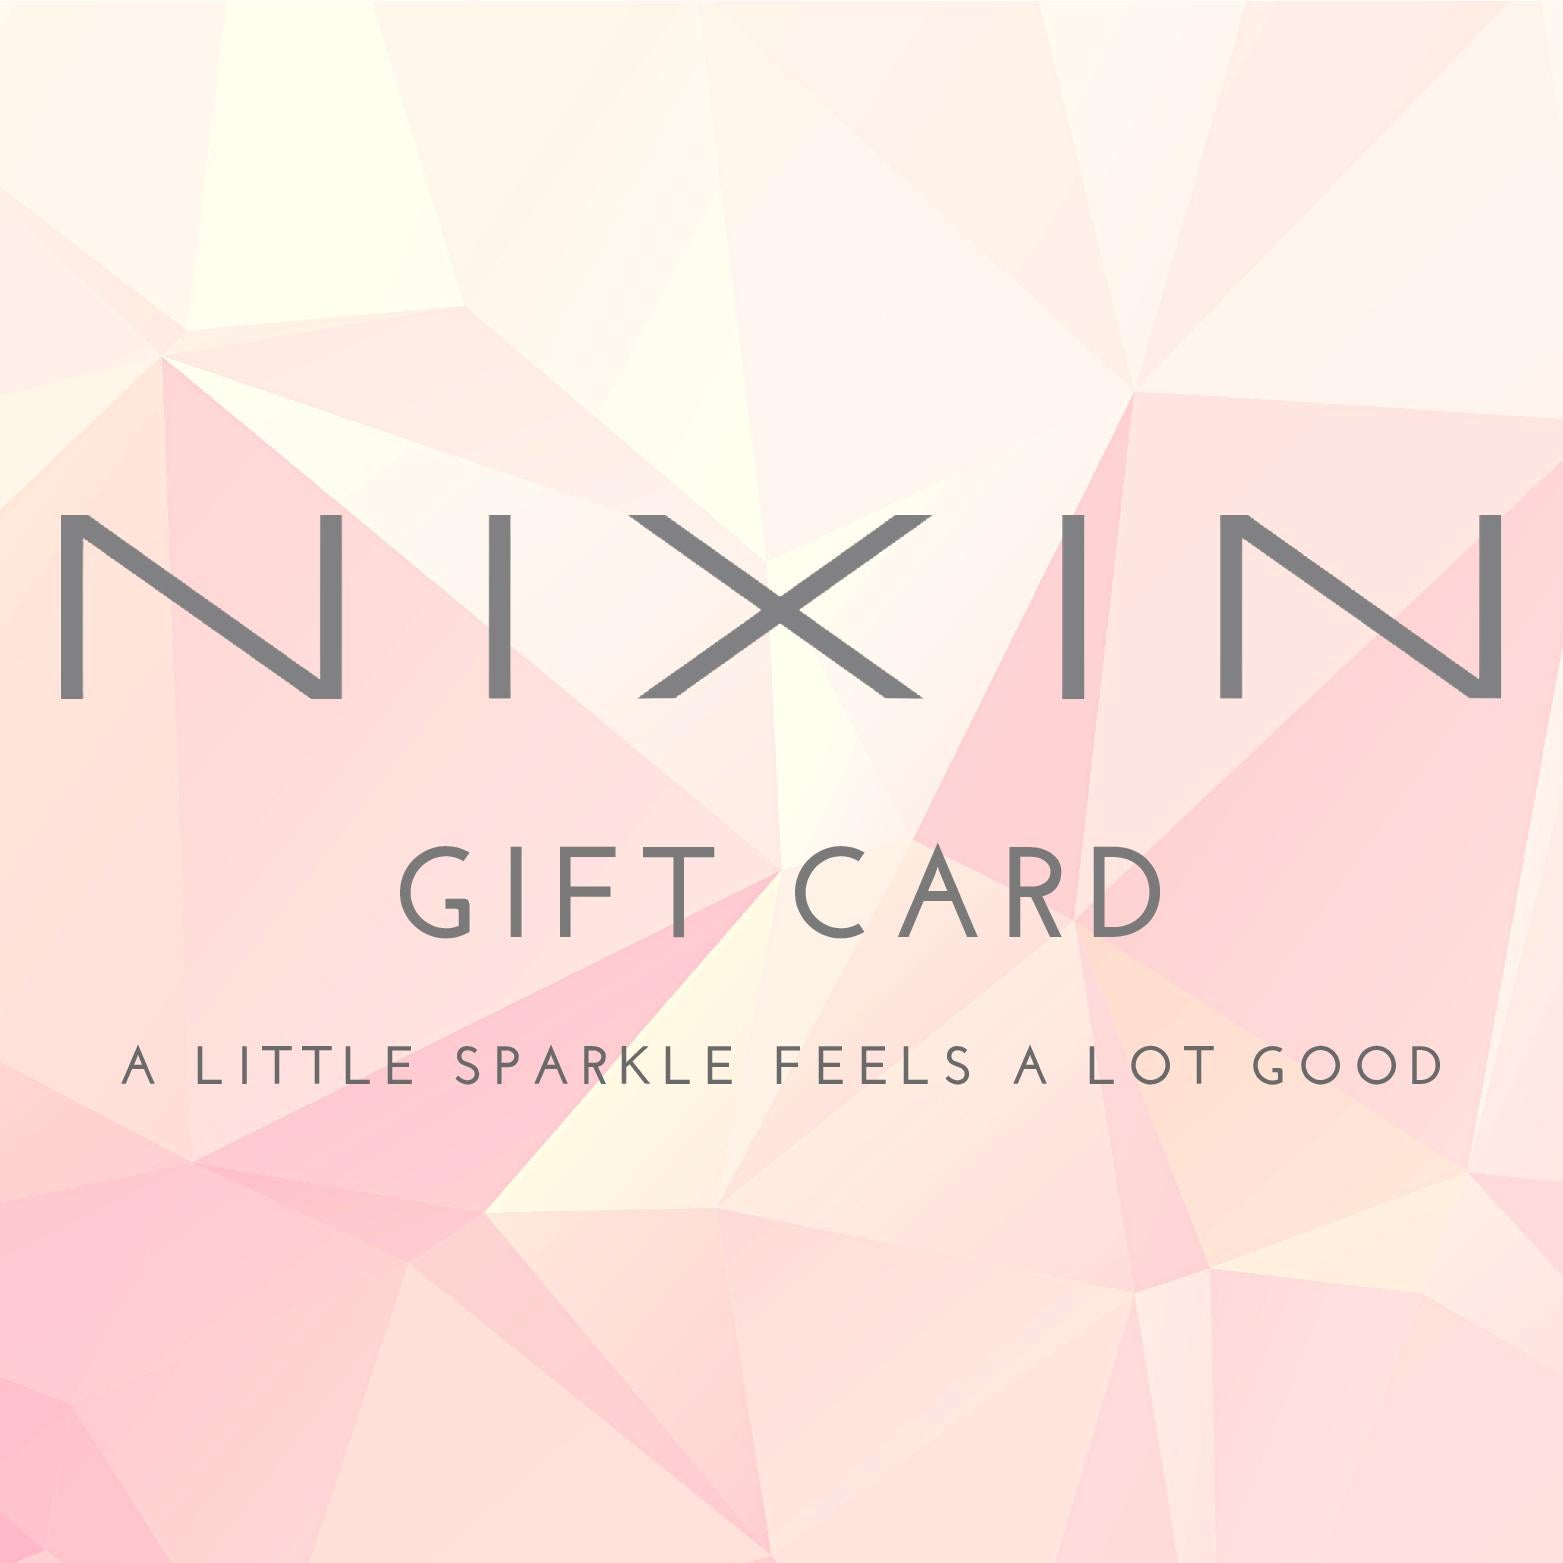 NIXIN Jewelry Gift Card with a color branded pale pink geometric graphic background and grey writing on top. Gift card is available in various denominations.